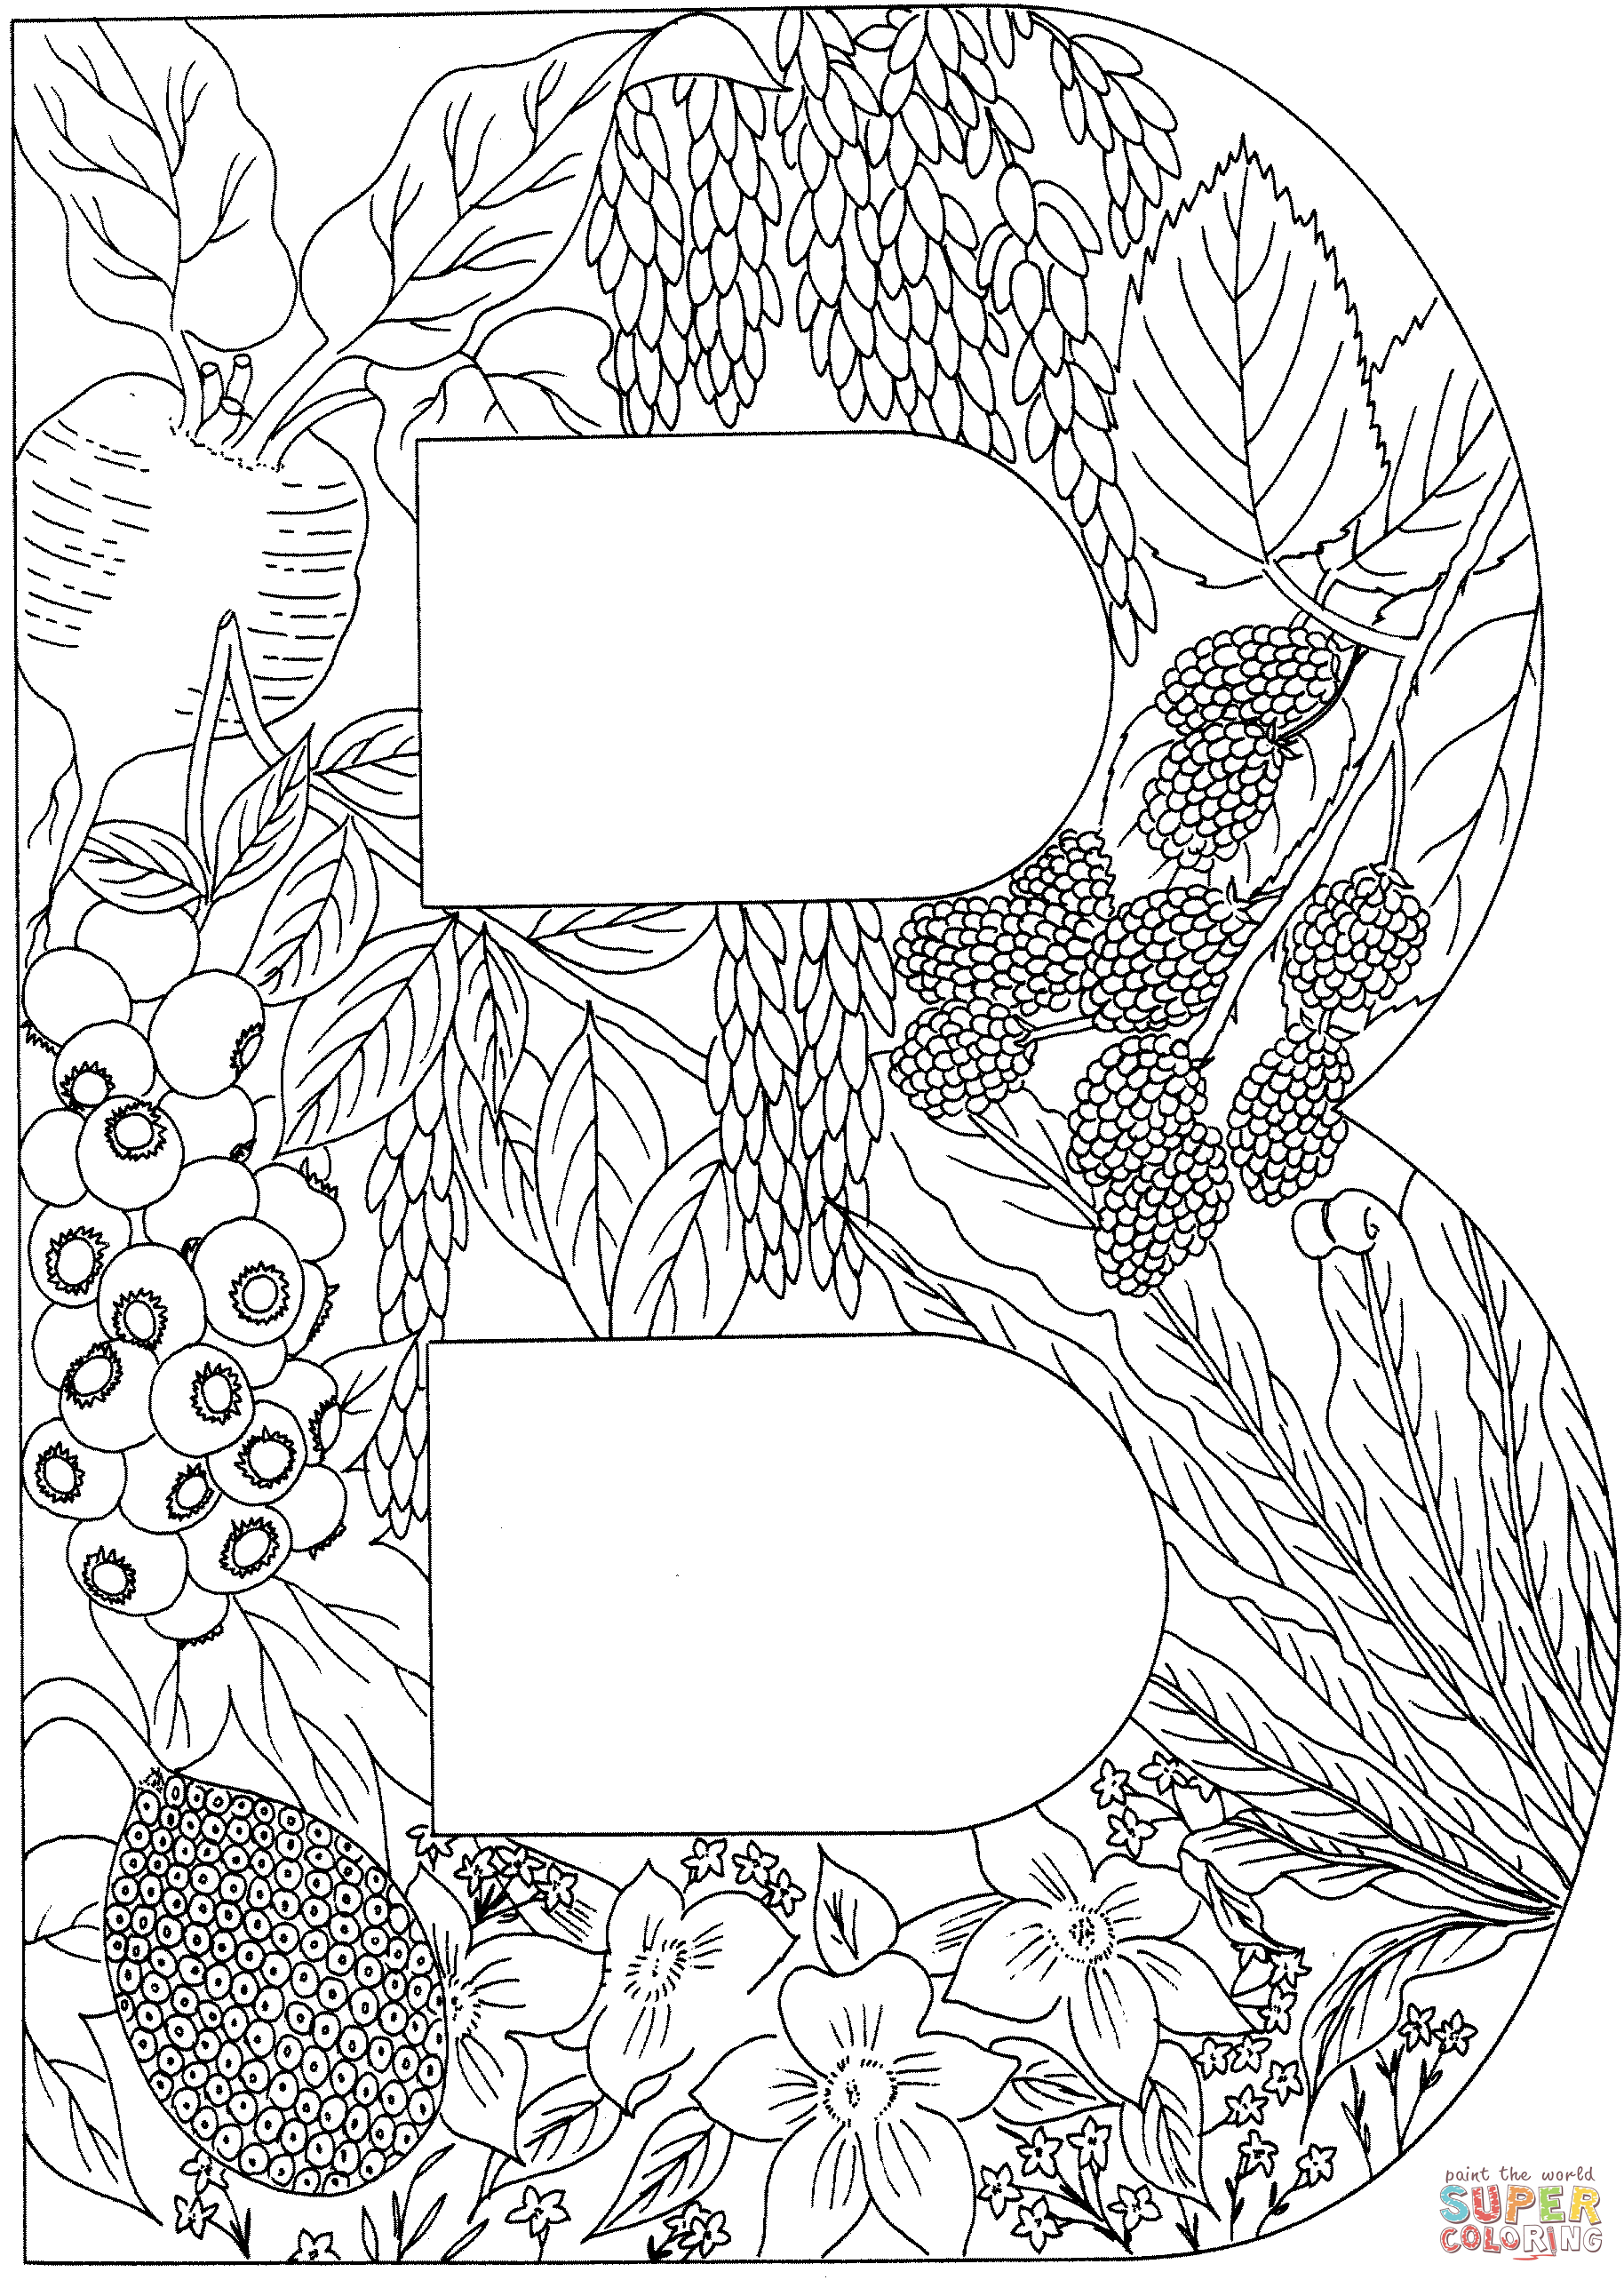 Letter B Coloring Page Free Printable Coloring Pages Alphabet Coloring Pages Letter A